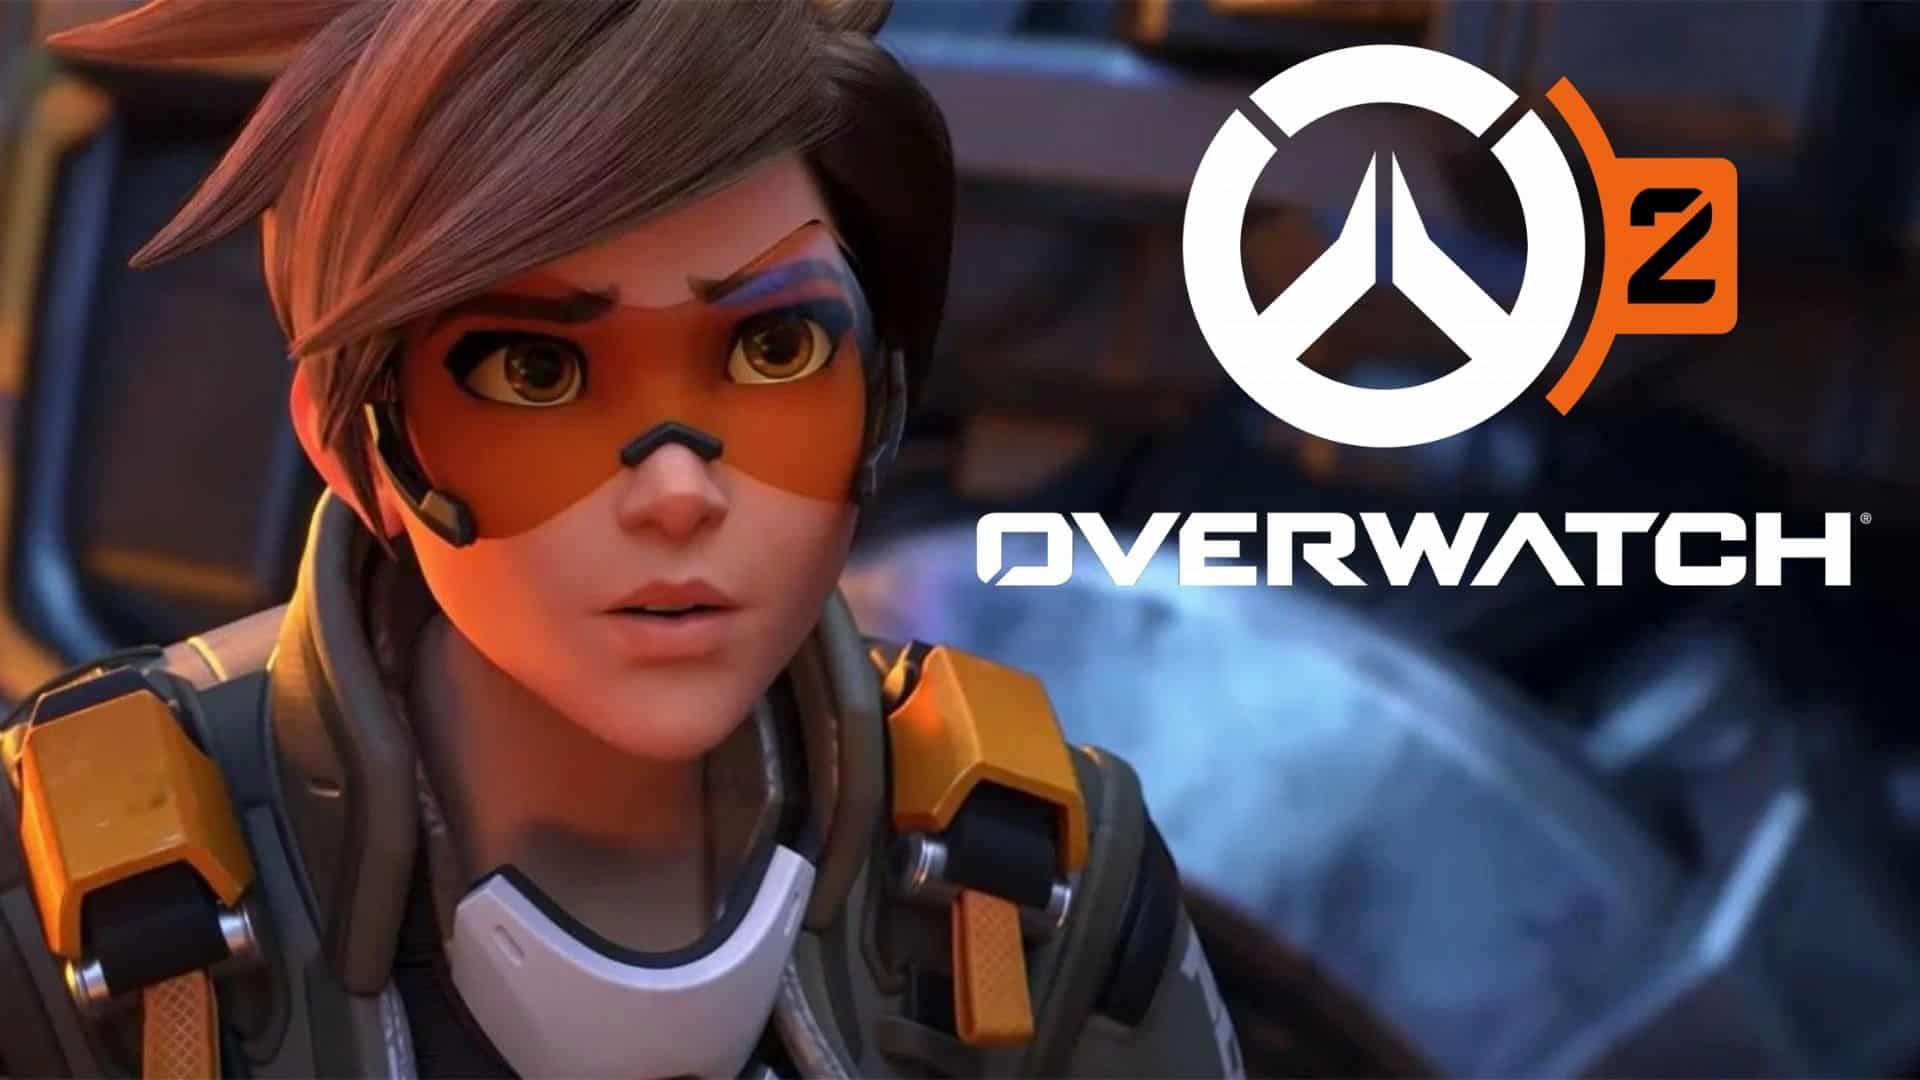 tracer overwatch 2 logo  Image of tracer overwatch 2 logo